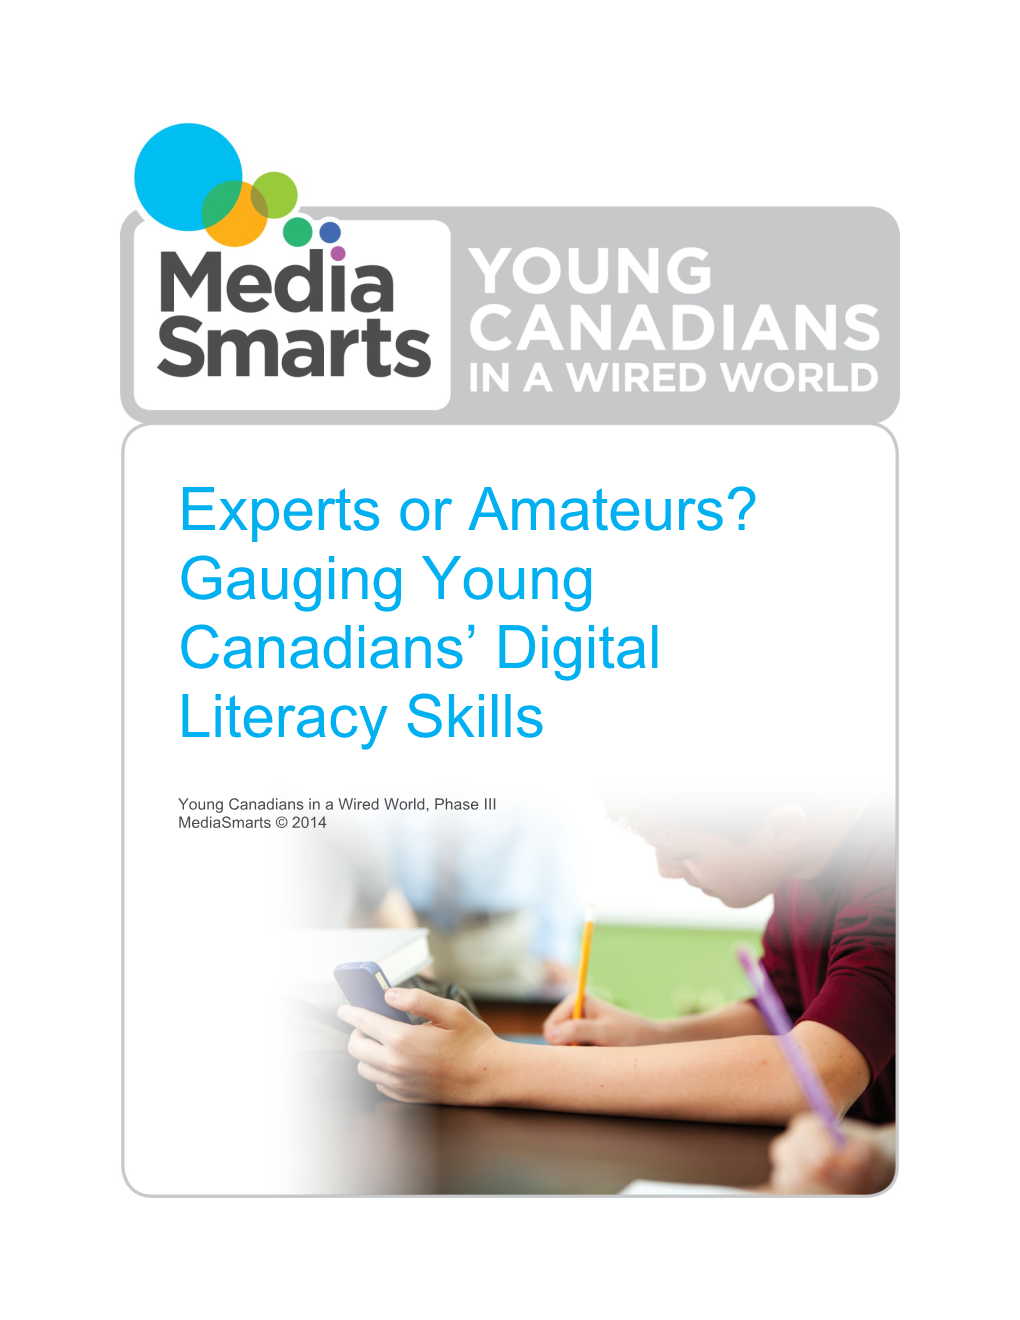 Experts Or Amateurs? Gauging Young Canadians' Digital Literacy Skills